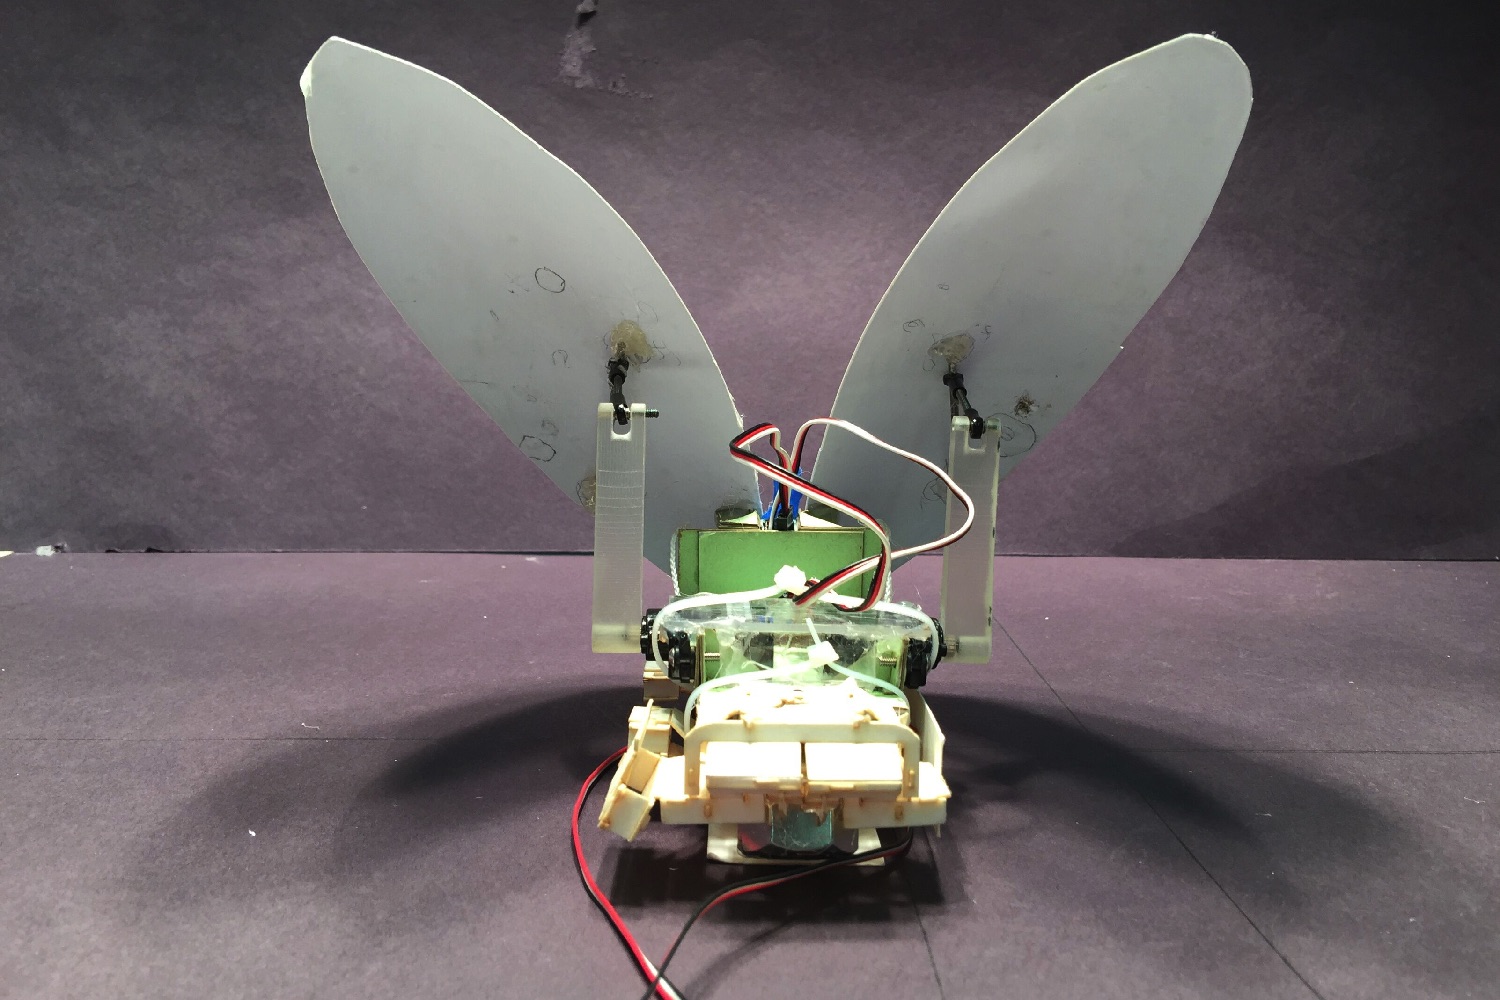 cockroach robot flaps its wings cockroach2